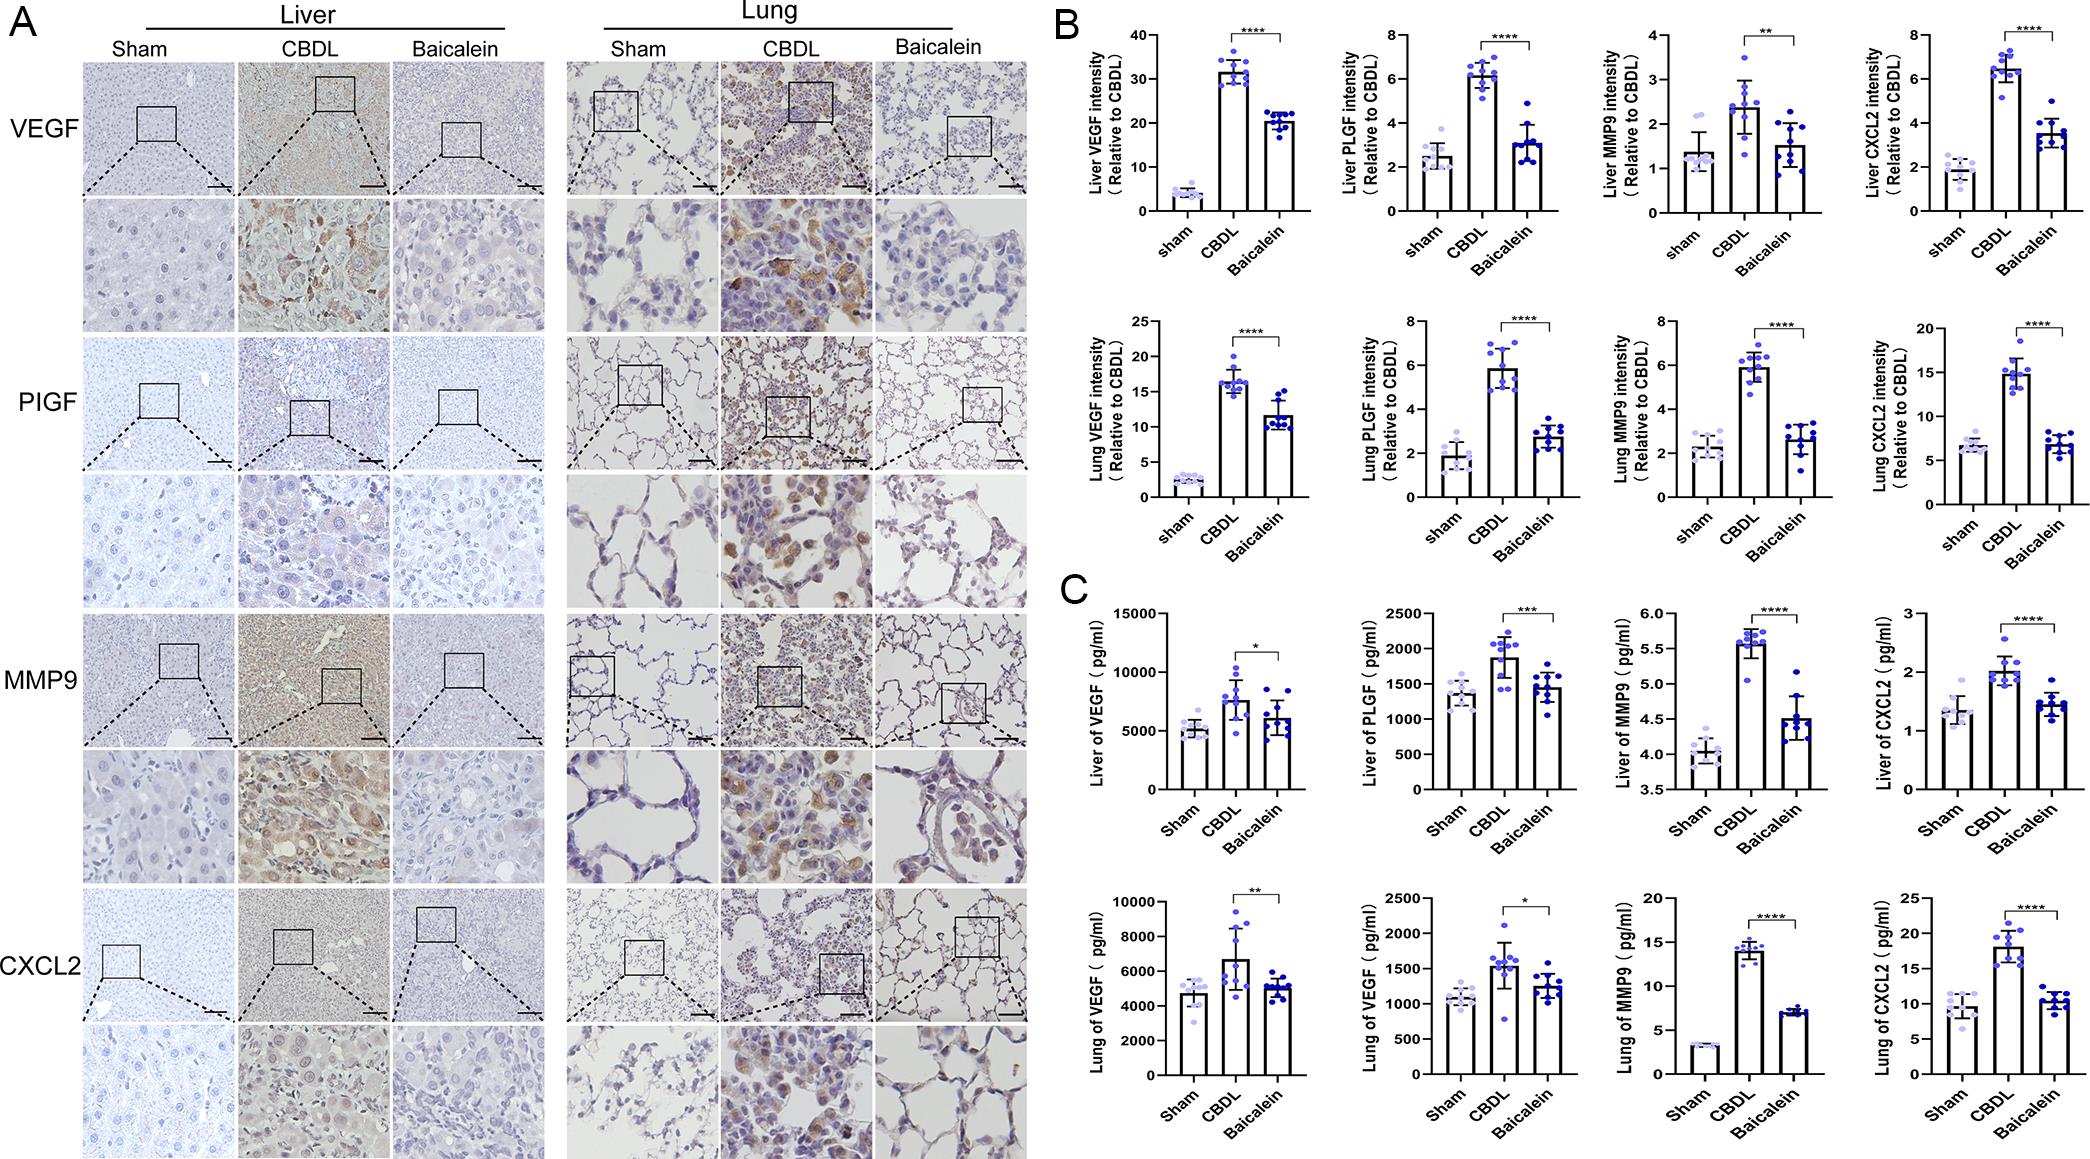 Baicalein attenuates the expression of angiogenesis-related proteins.